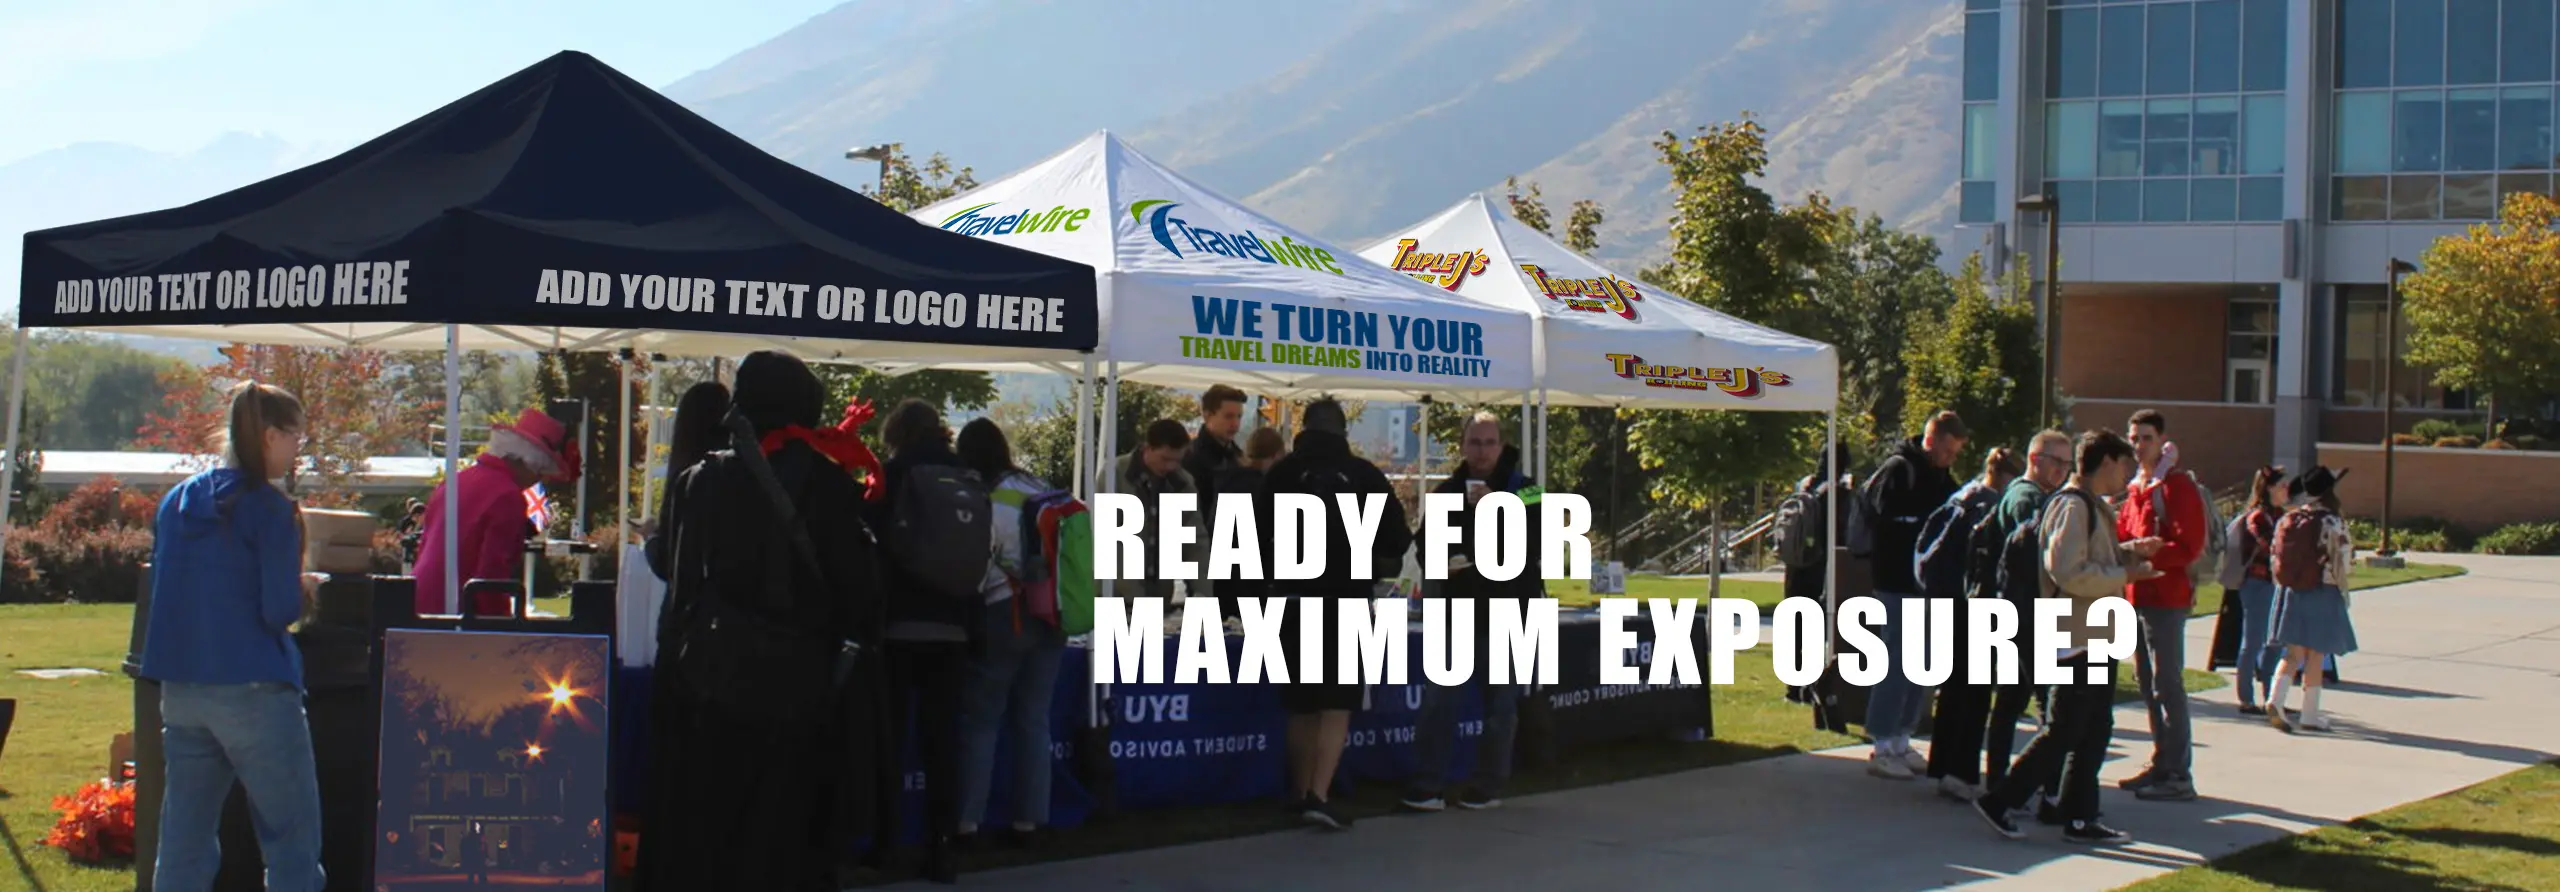 Custom Event Tents & Signage - Get Your Branded Canopy Today!